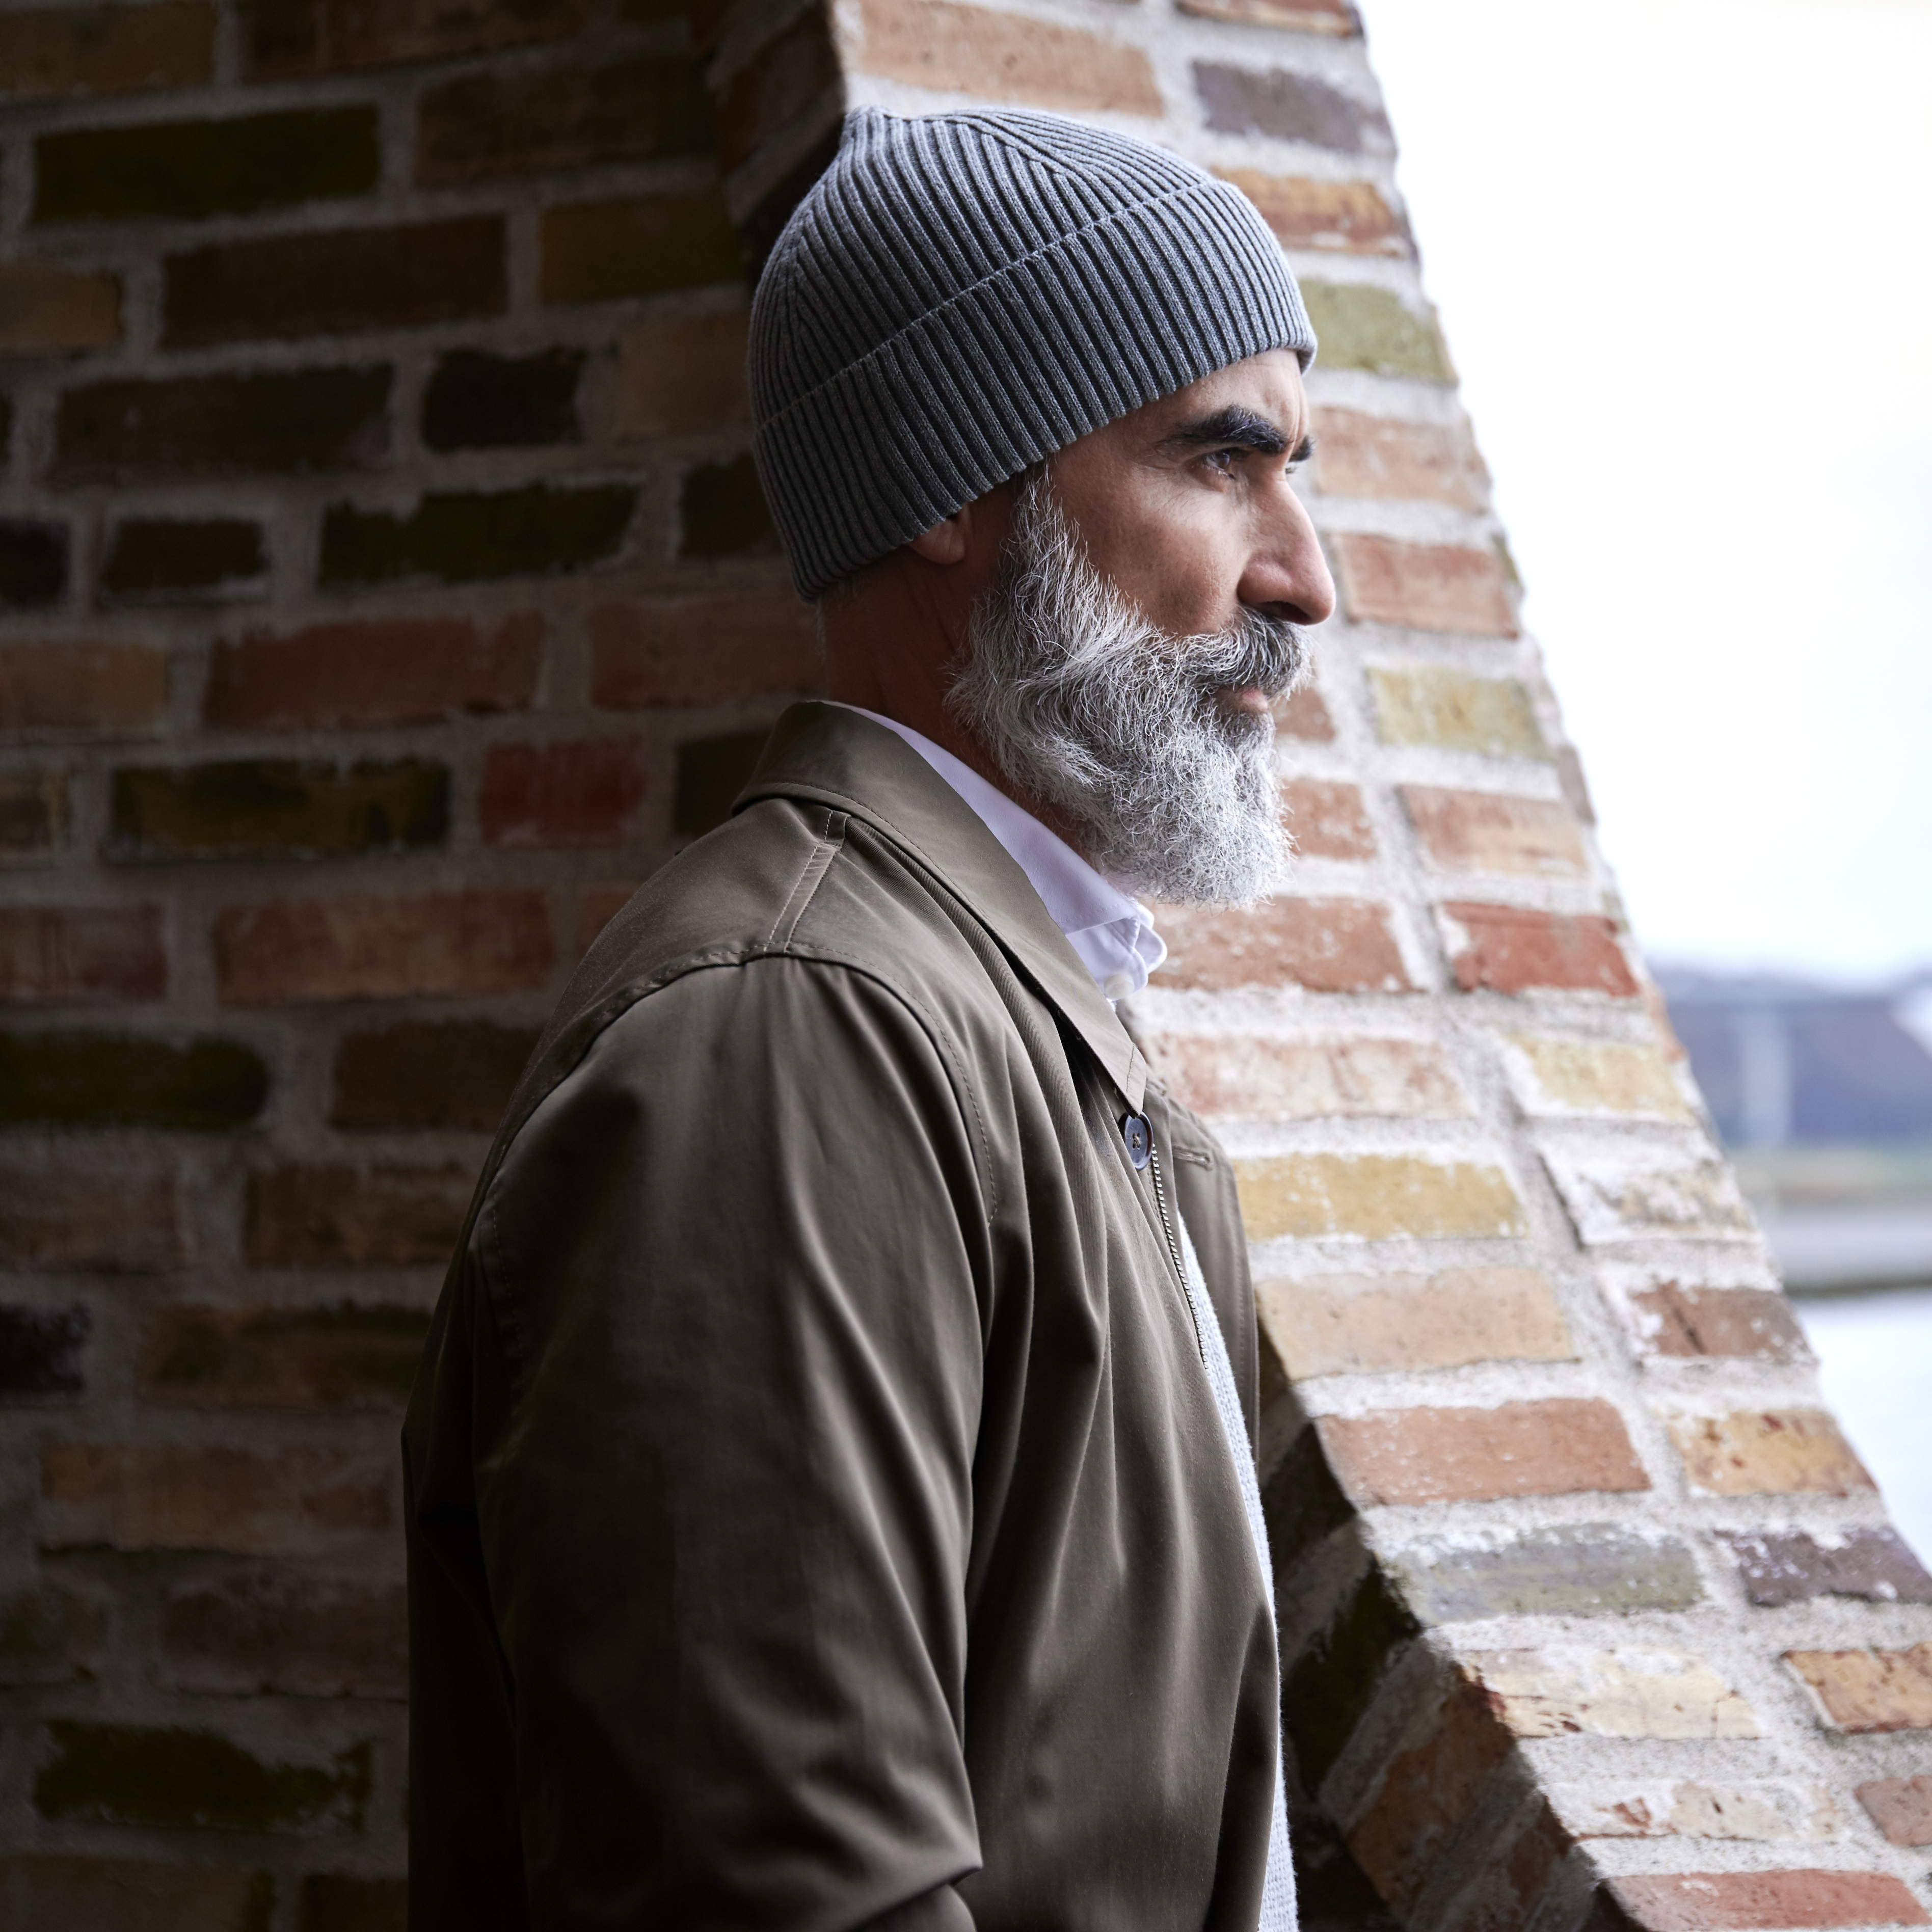 How to Wear a Beanie: The Ultimate Guide for Men